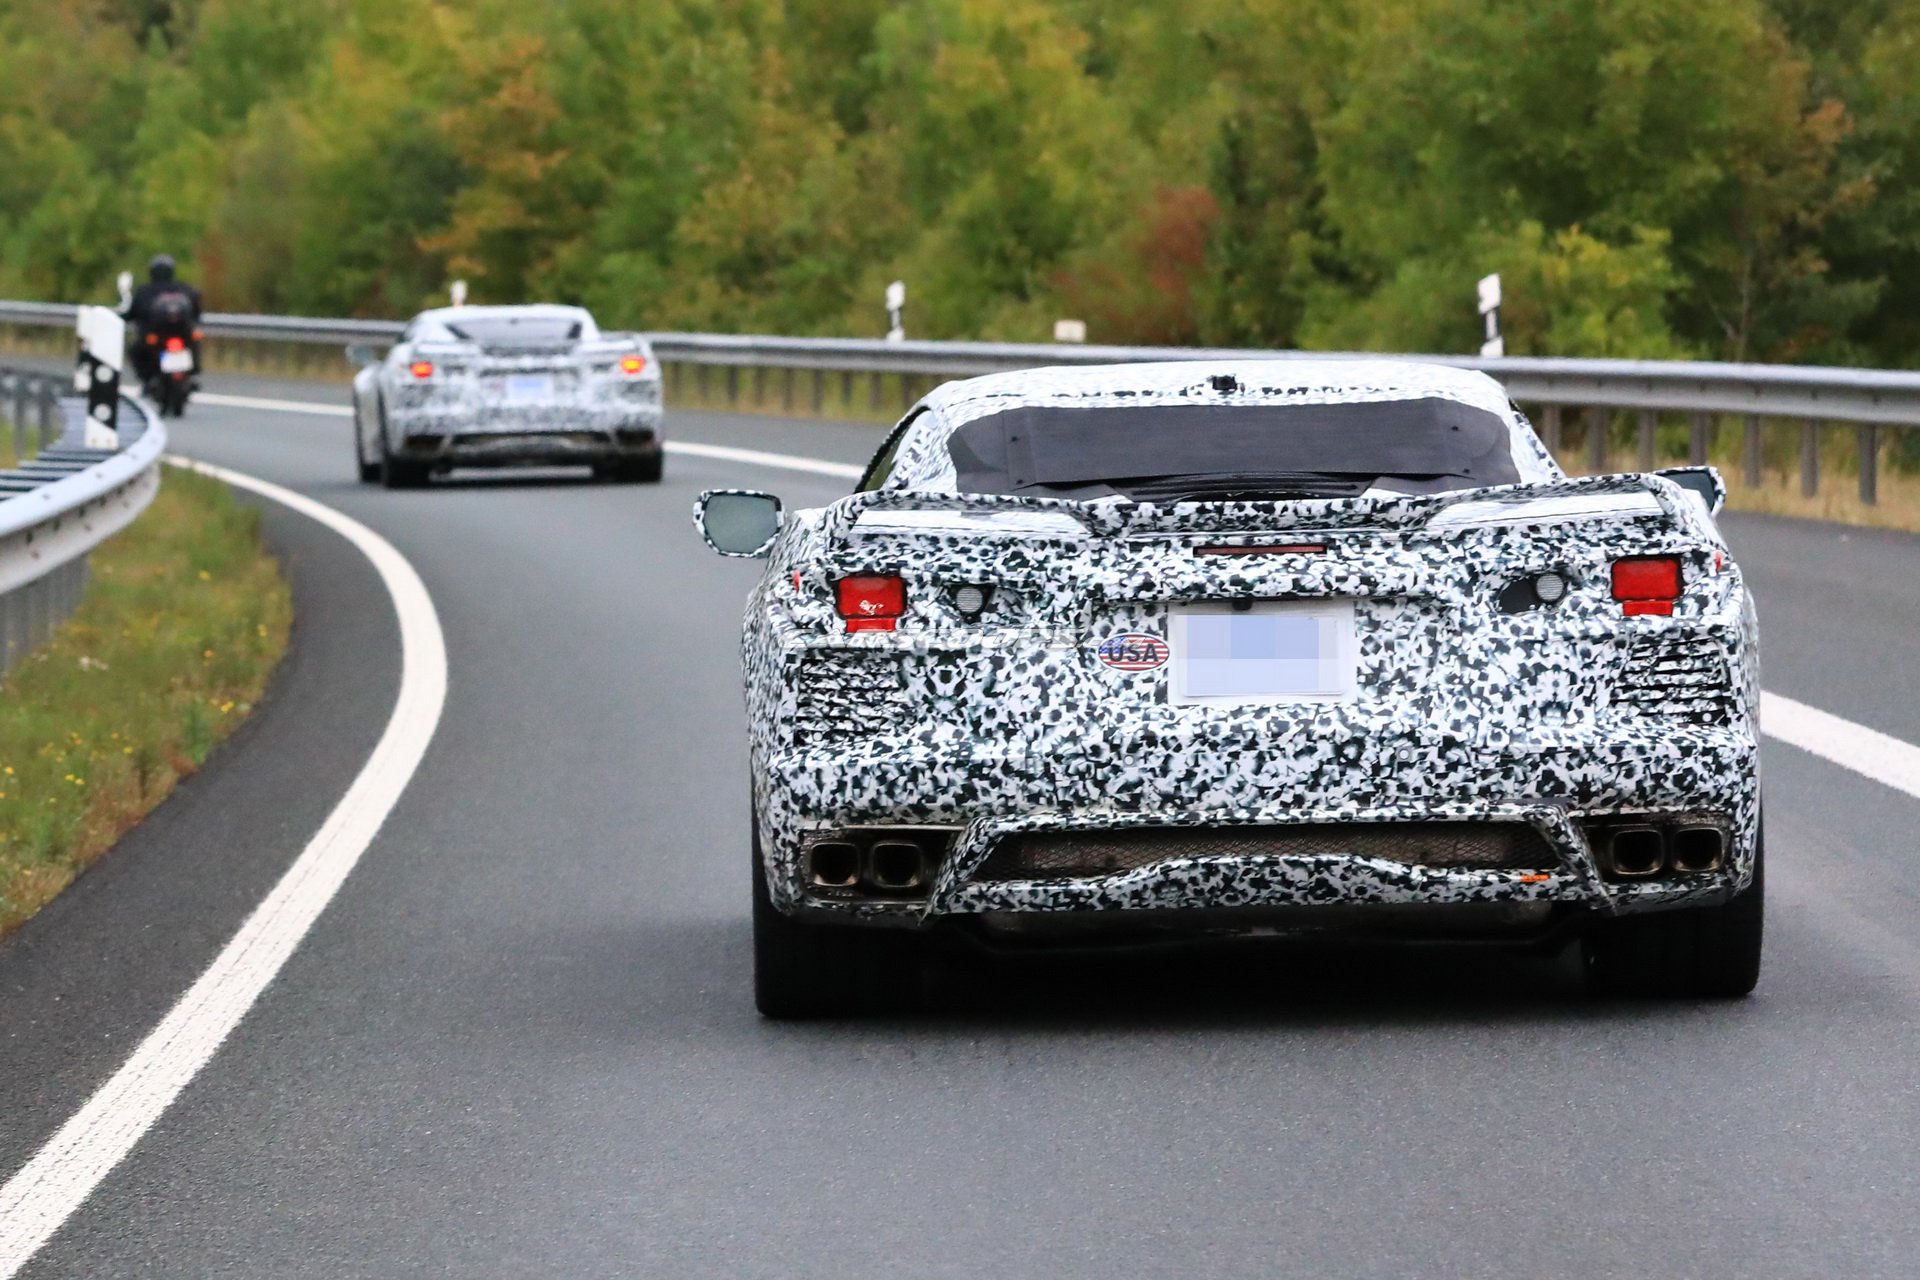 The 2020 Mid-Engine Corvette photographed near the Nurburgring on September 3, 2018.